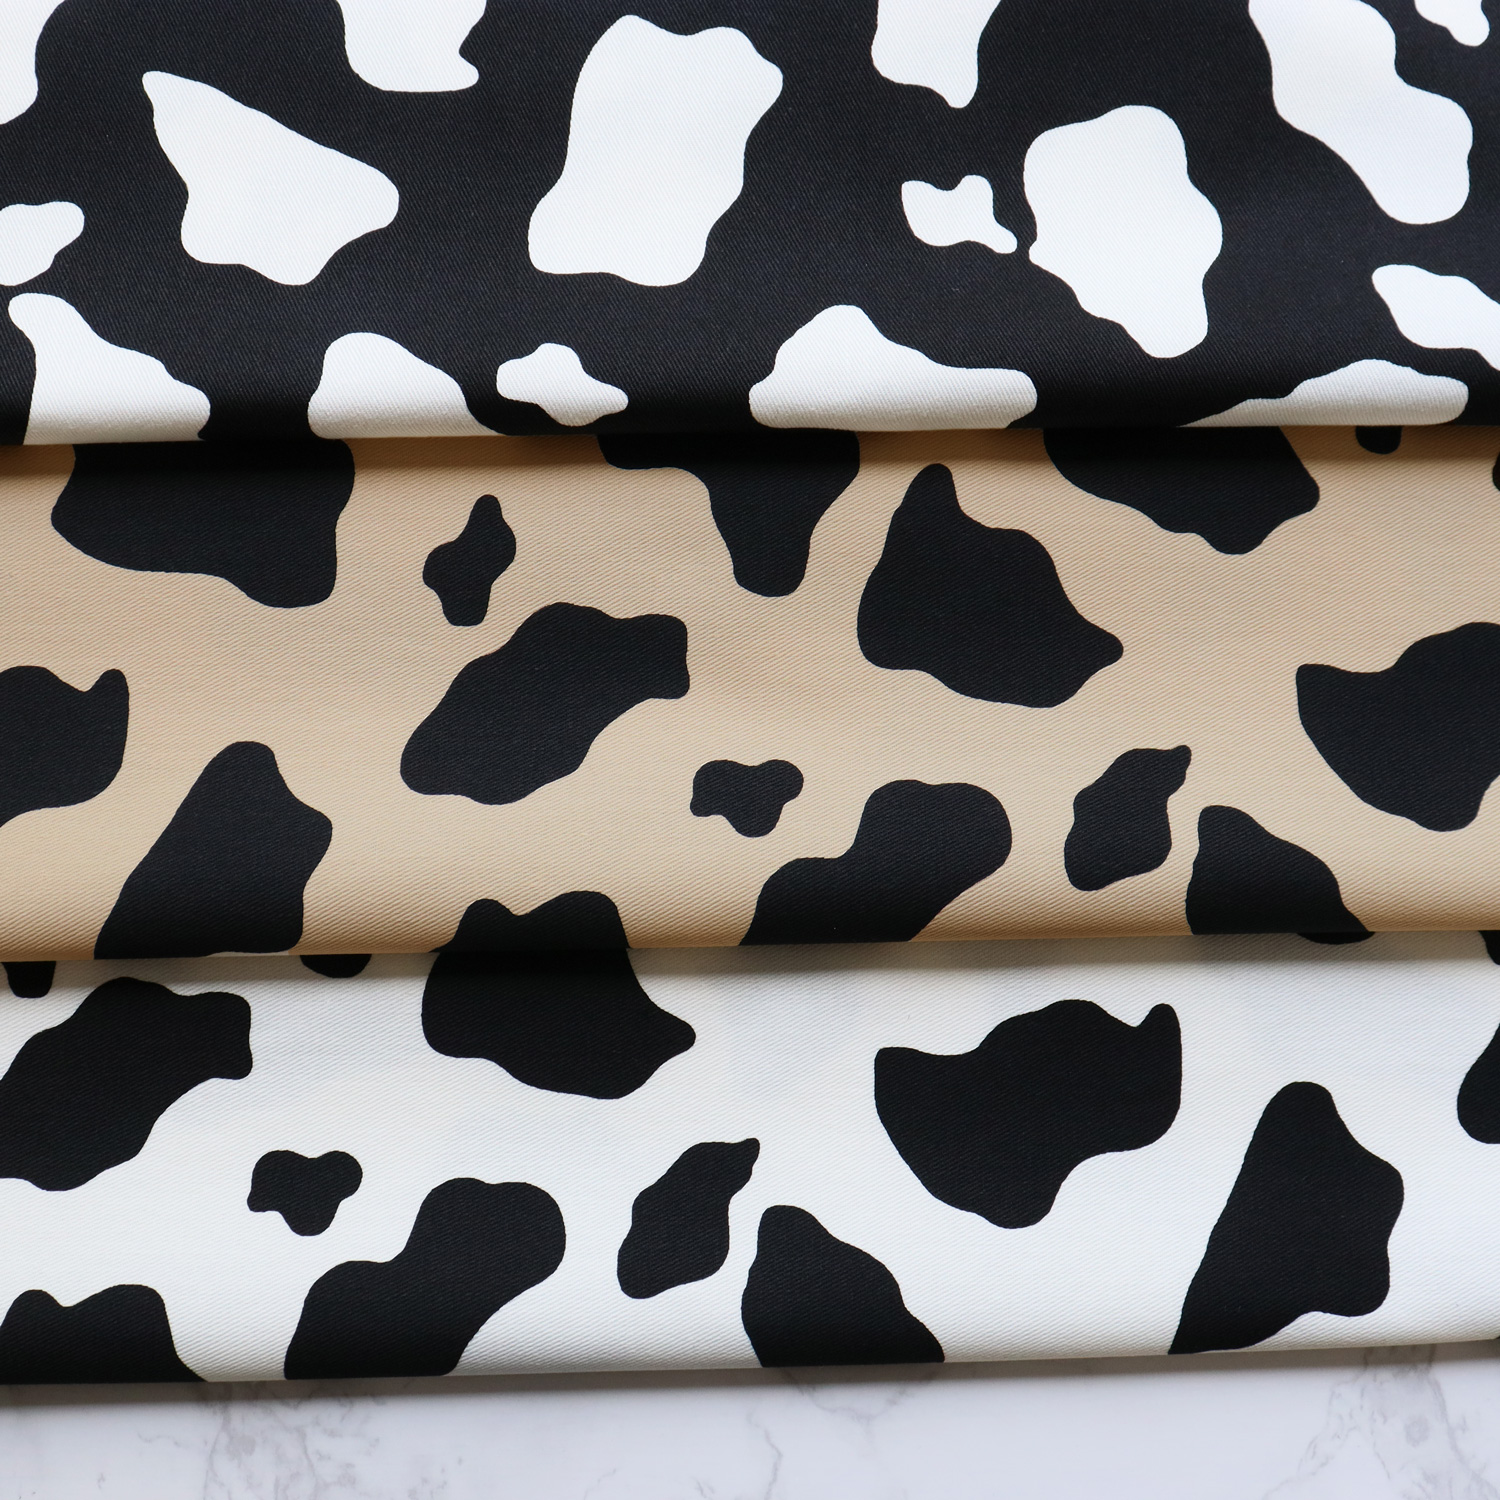 ■IBK7070R-11 Twill fabric, cow pattern, approximately 12m roll (roll)